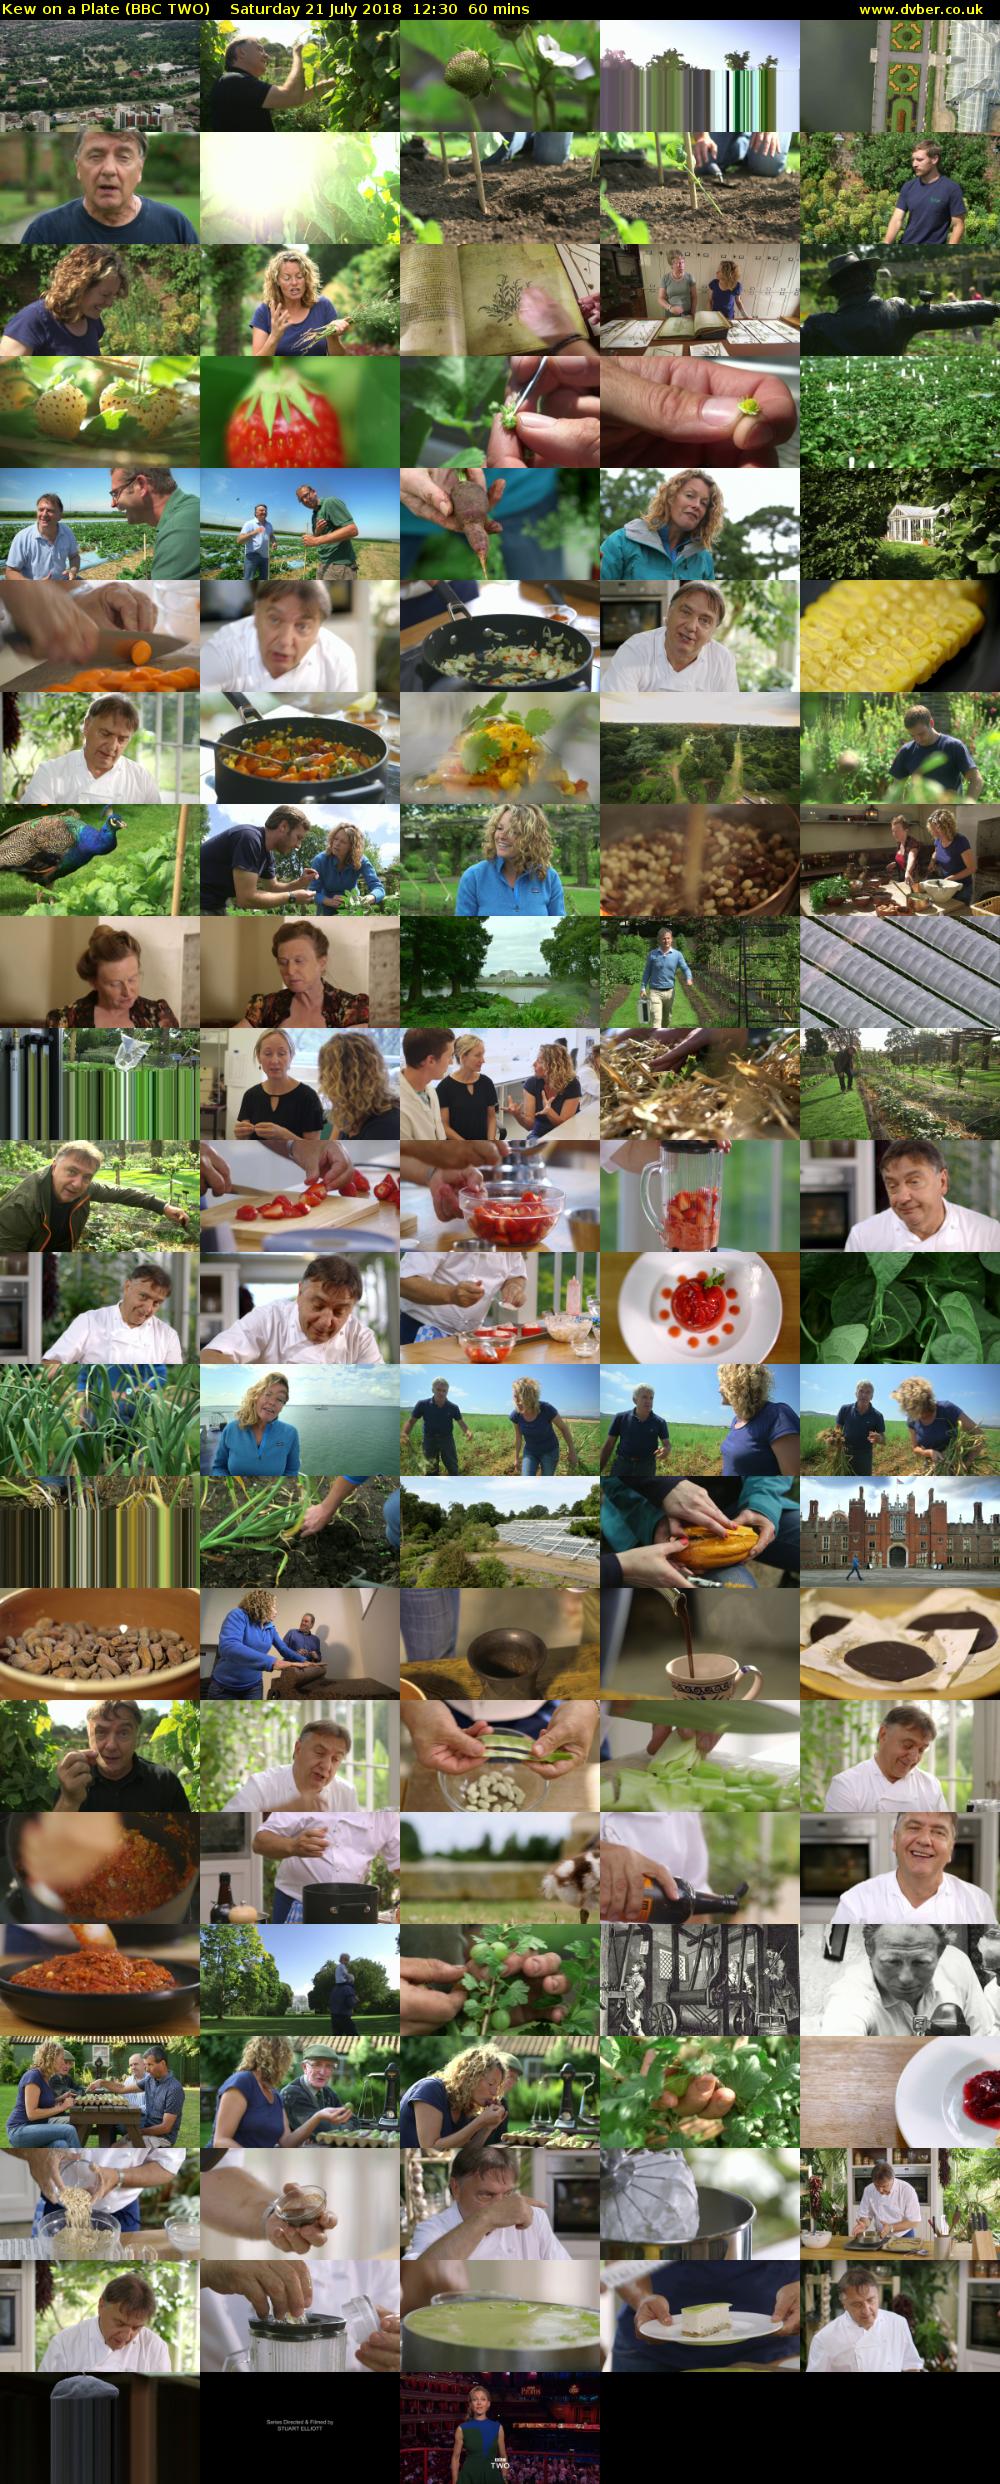 Kew on a Plate (BBC TWO) Saturday 21 July 2018 12:30 - 13:30